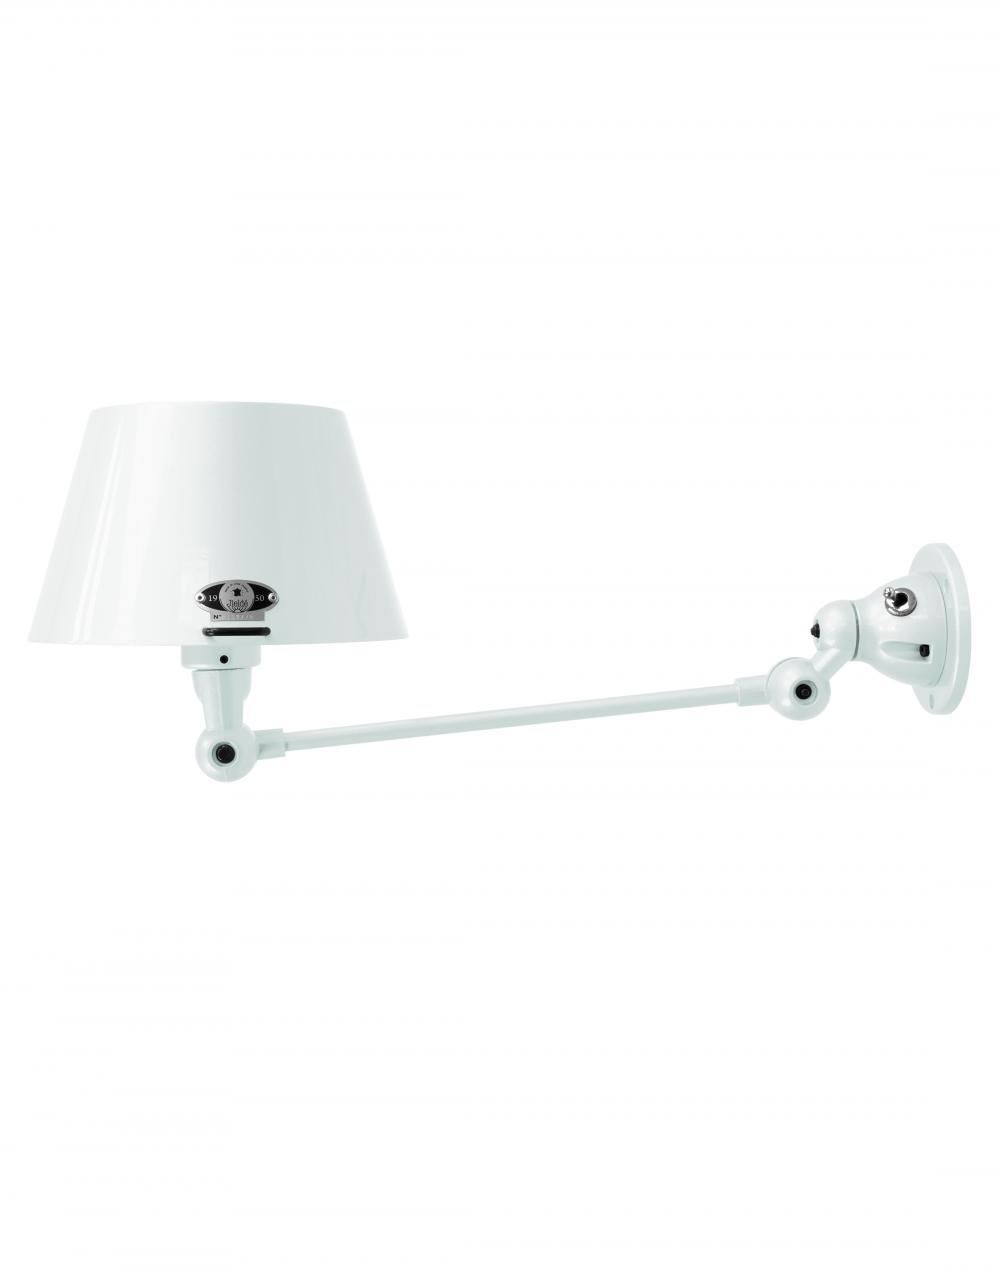 Jielde Aicler One Arm Adjustable Wall Light Straight Shade White Gloss Hardwired No Switch